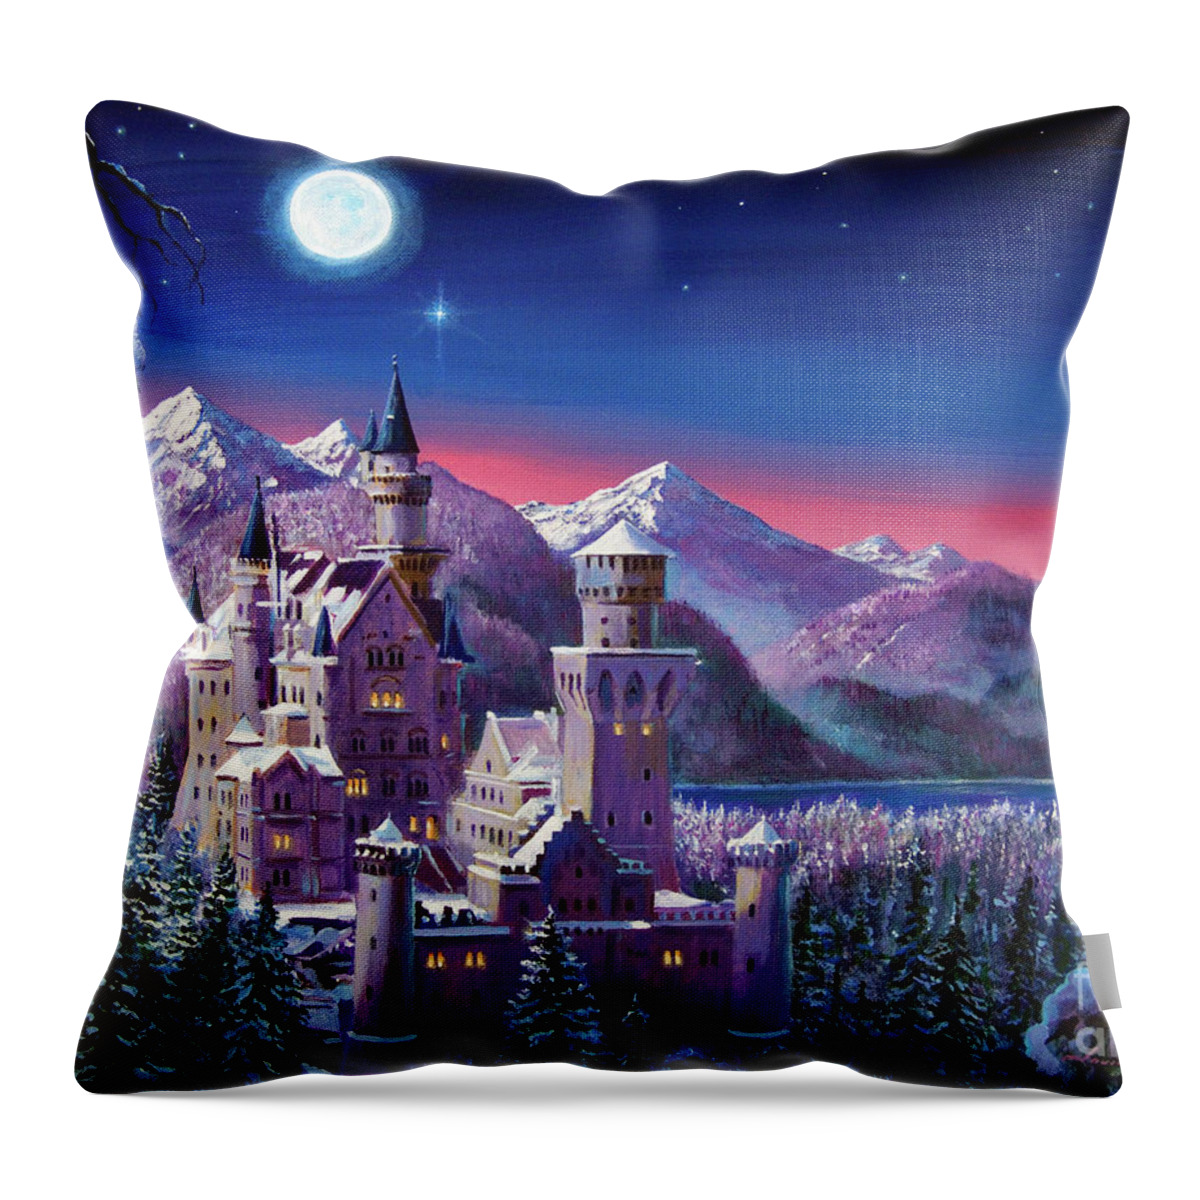 Snow Throw Pillow featuring the painting Snow Castle by David Lloyd Glover